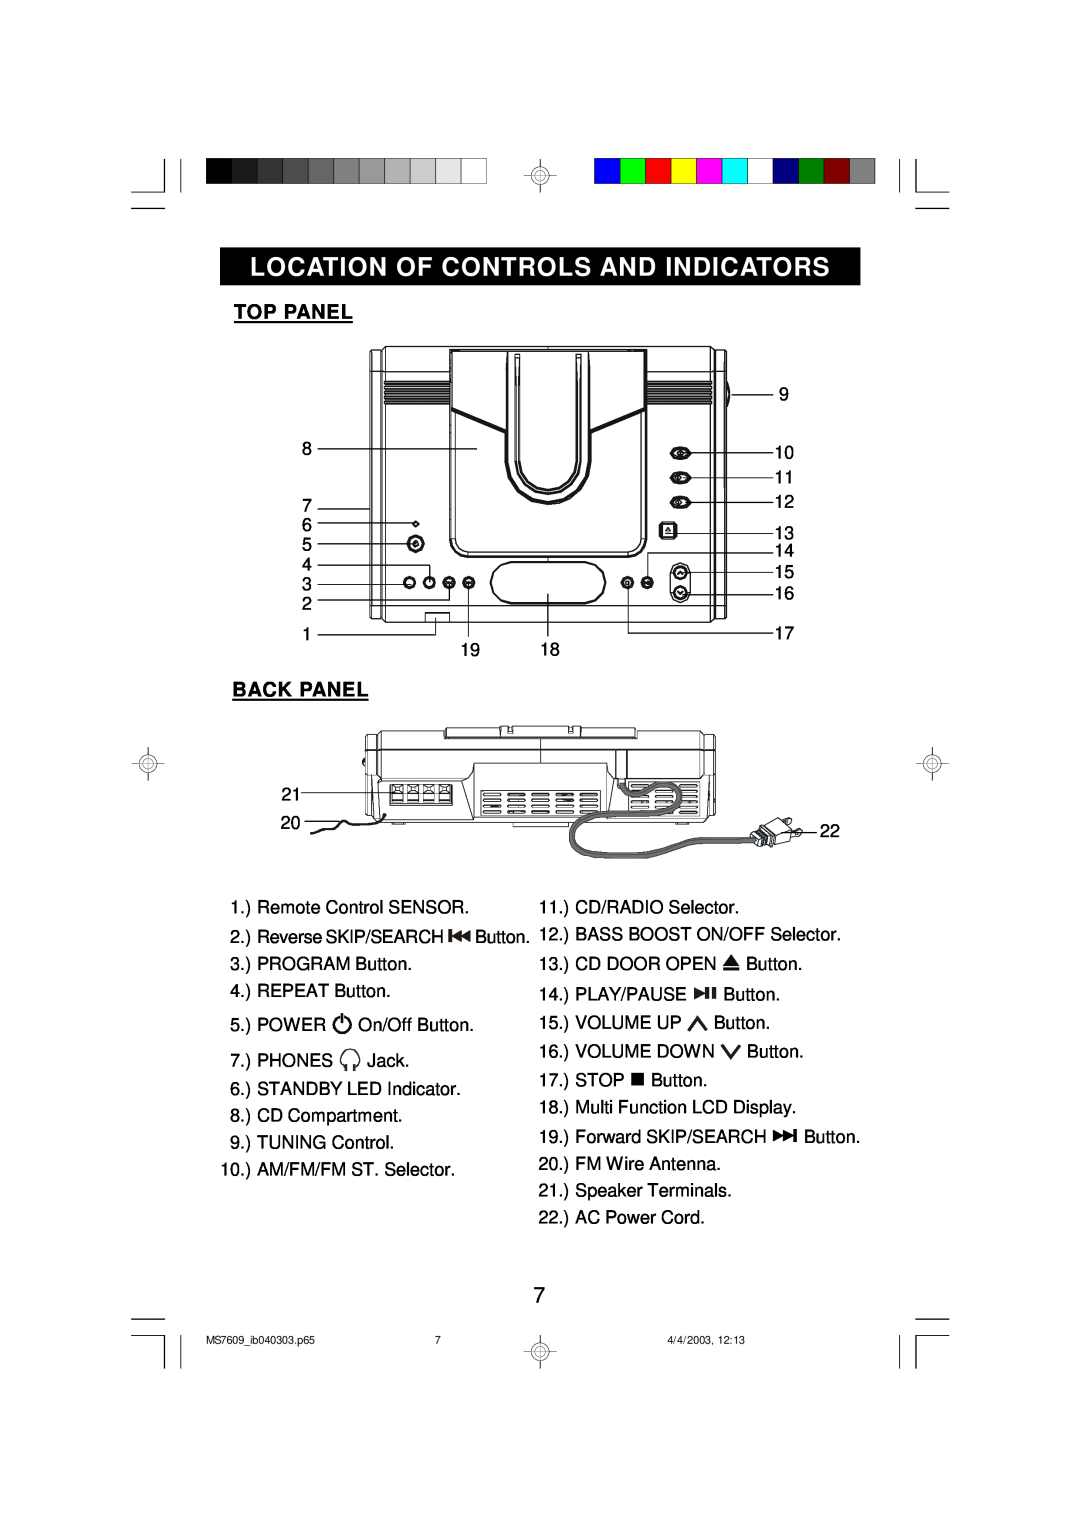 Emerson MS7609 owner manual Location Of Controls And Indicators, Top Panel, Back Panel 